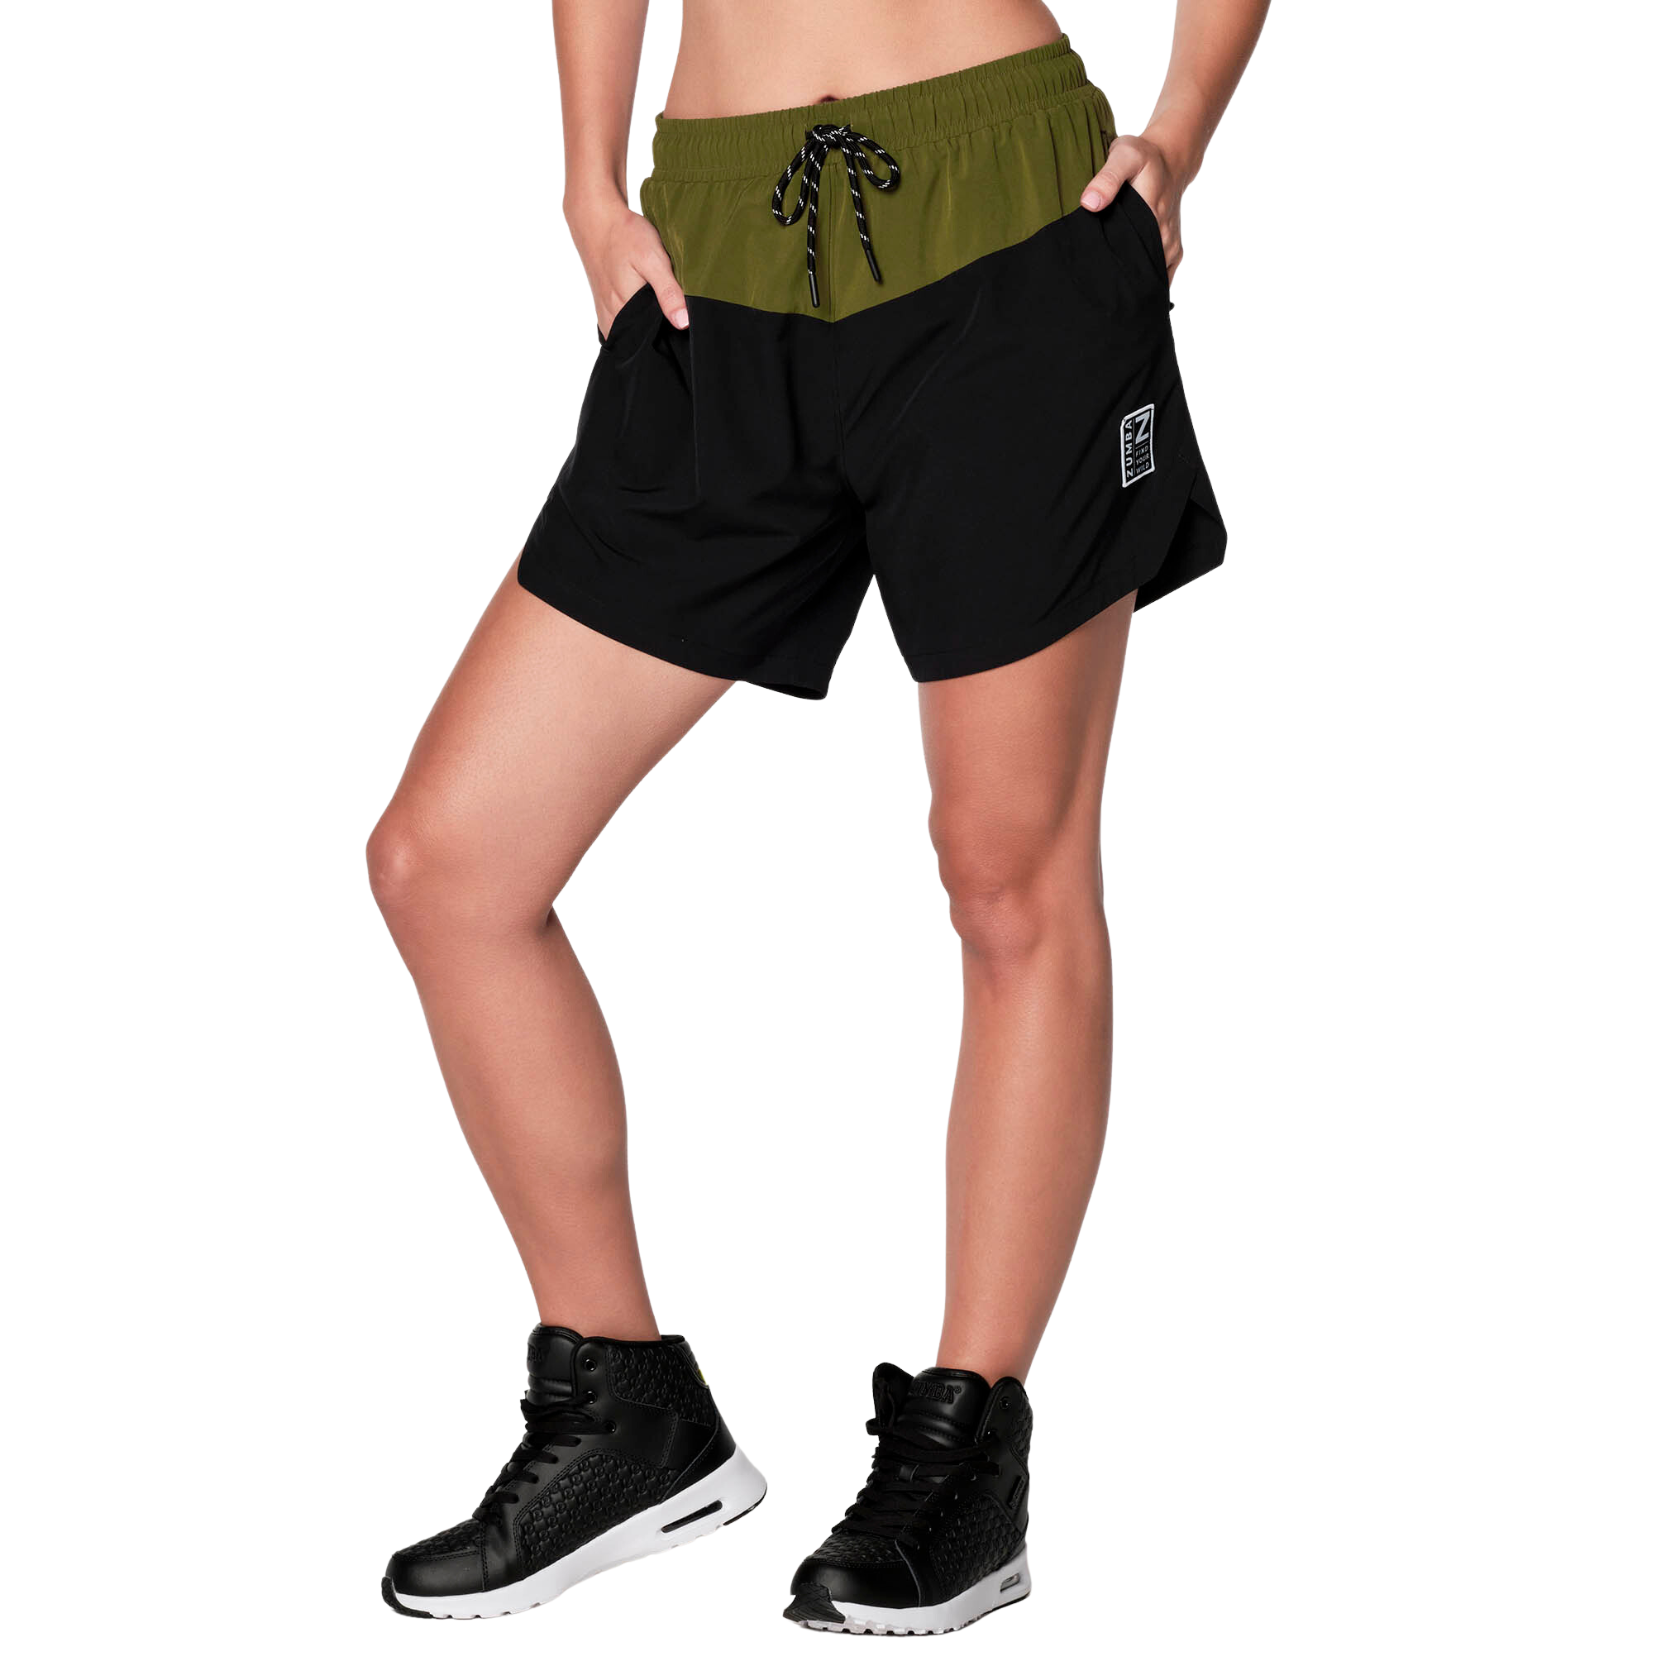 Zumba Chillin' Shorts (Special Order)